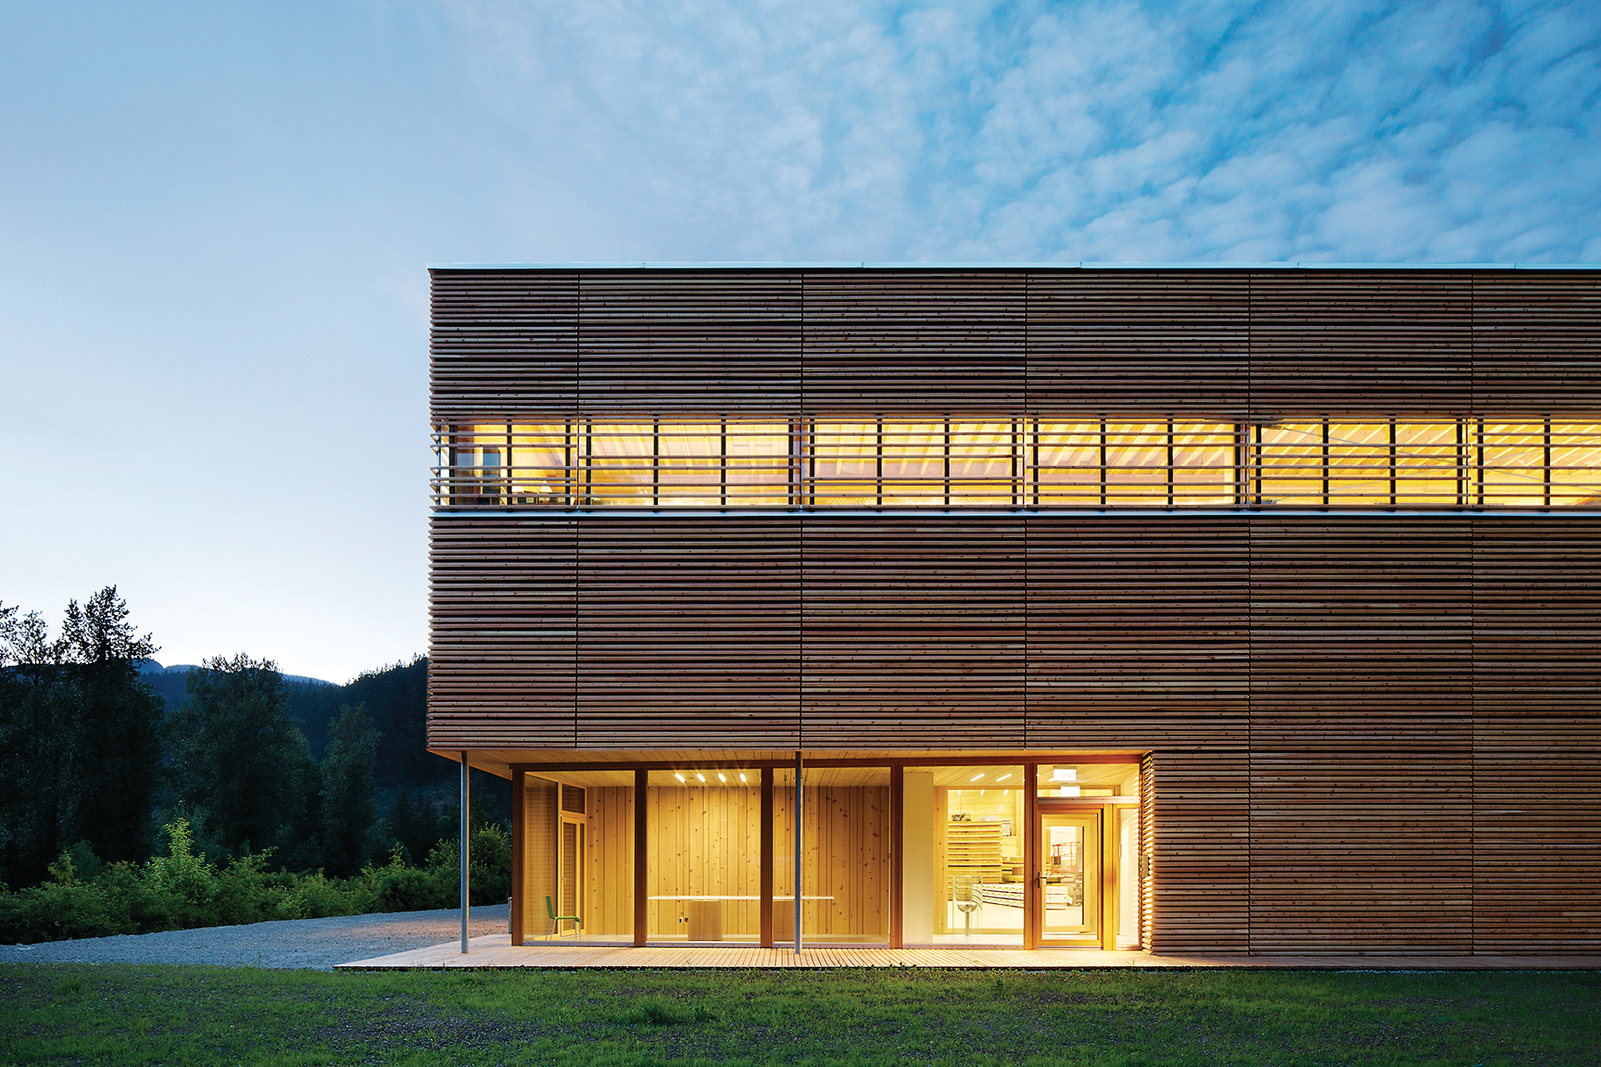 Exterior evening view of BC Passive House Factory, a low rise passive house structure built with light frame and mass timber components such as Cross-laminated timber (CLT), I-beams, I-joists, and hybrid / wood